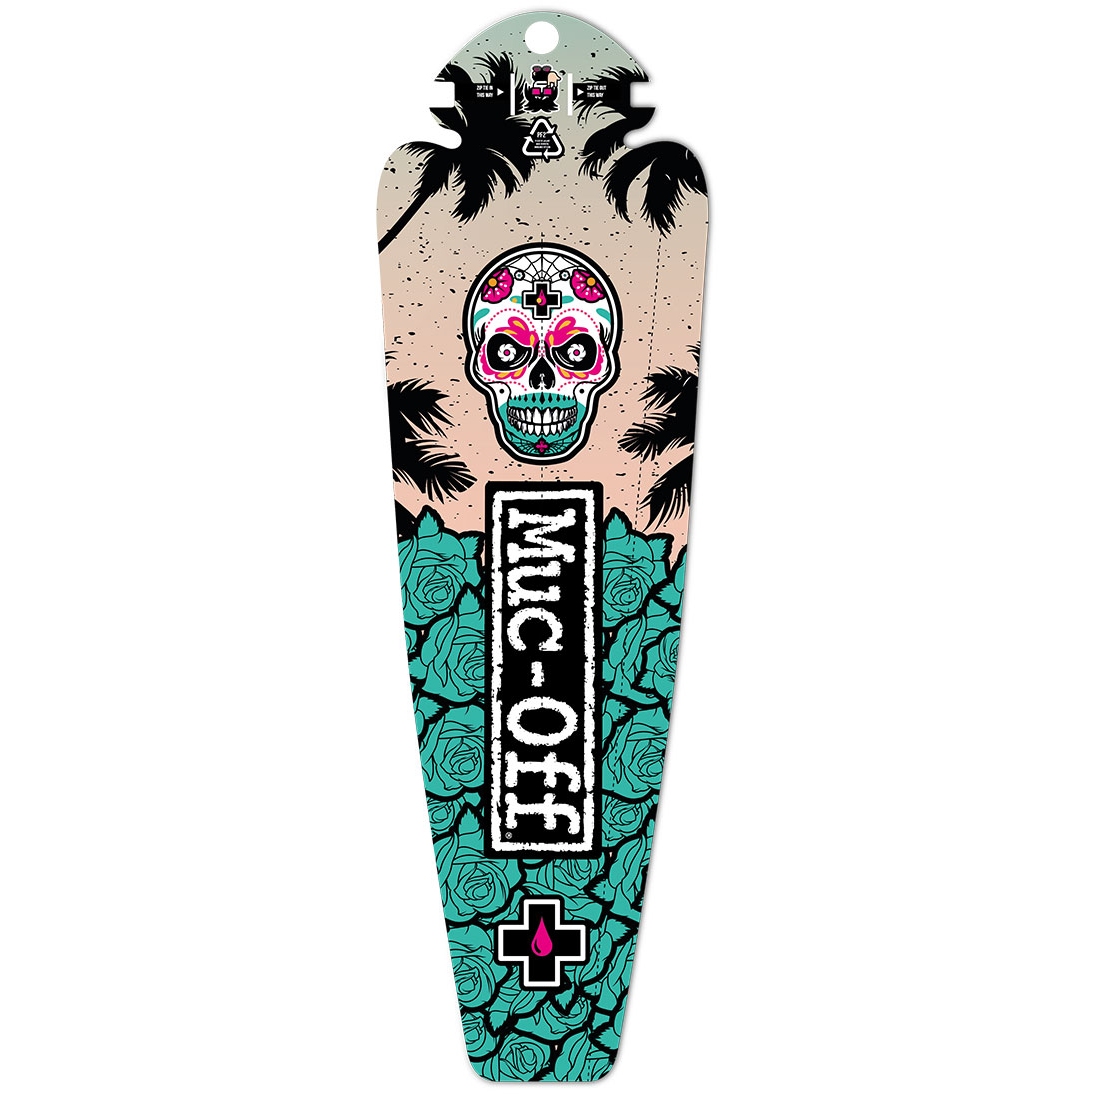 Productfoto van Muc-Off Ride Guard Rear Fender - day of the shred